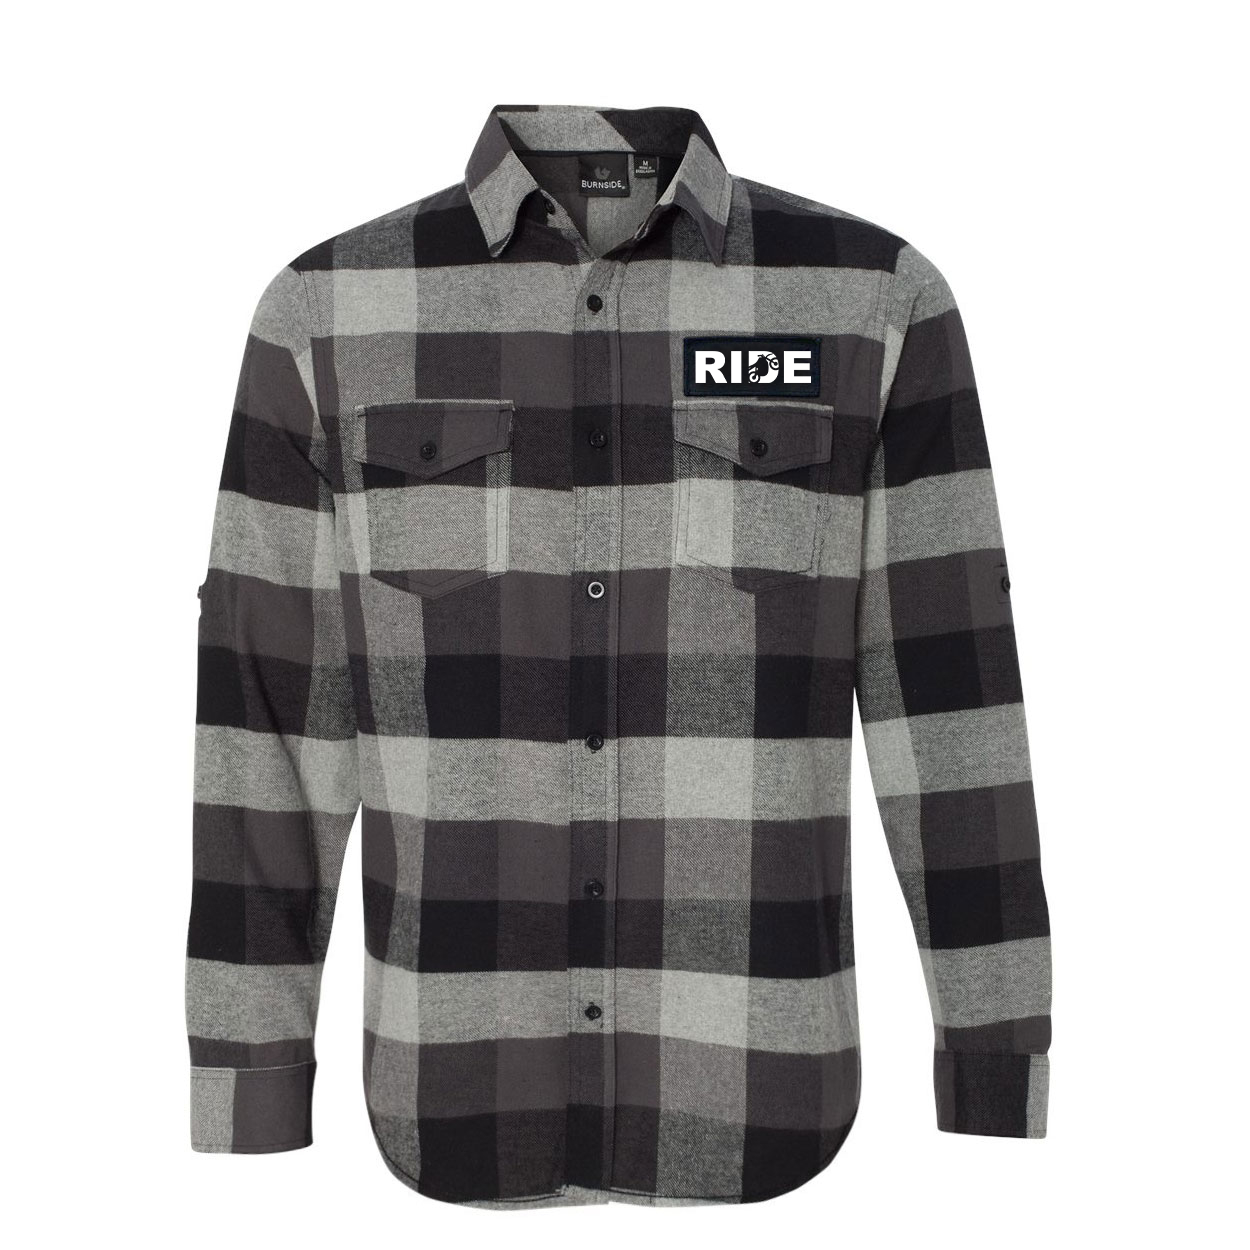 Ride Moto Logo Classic Unisex Woven Patch Quilted Button Flannel Jacket Gray/White (White Logo)